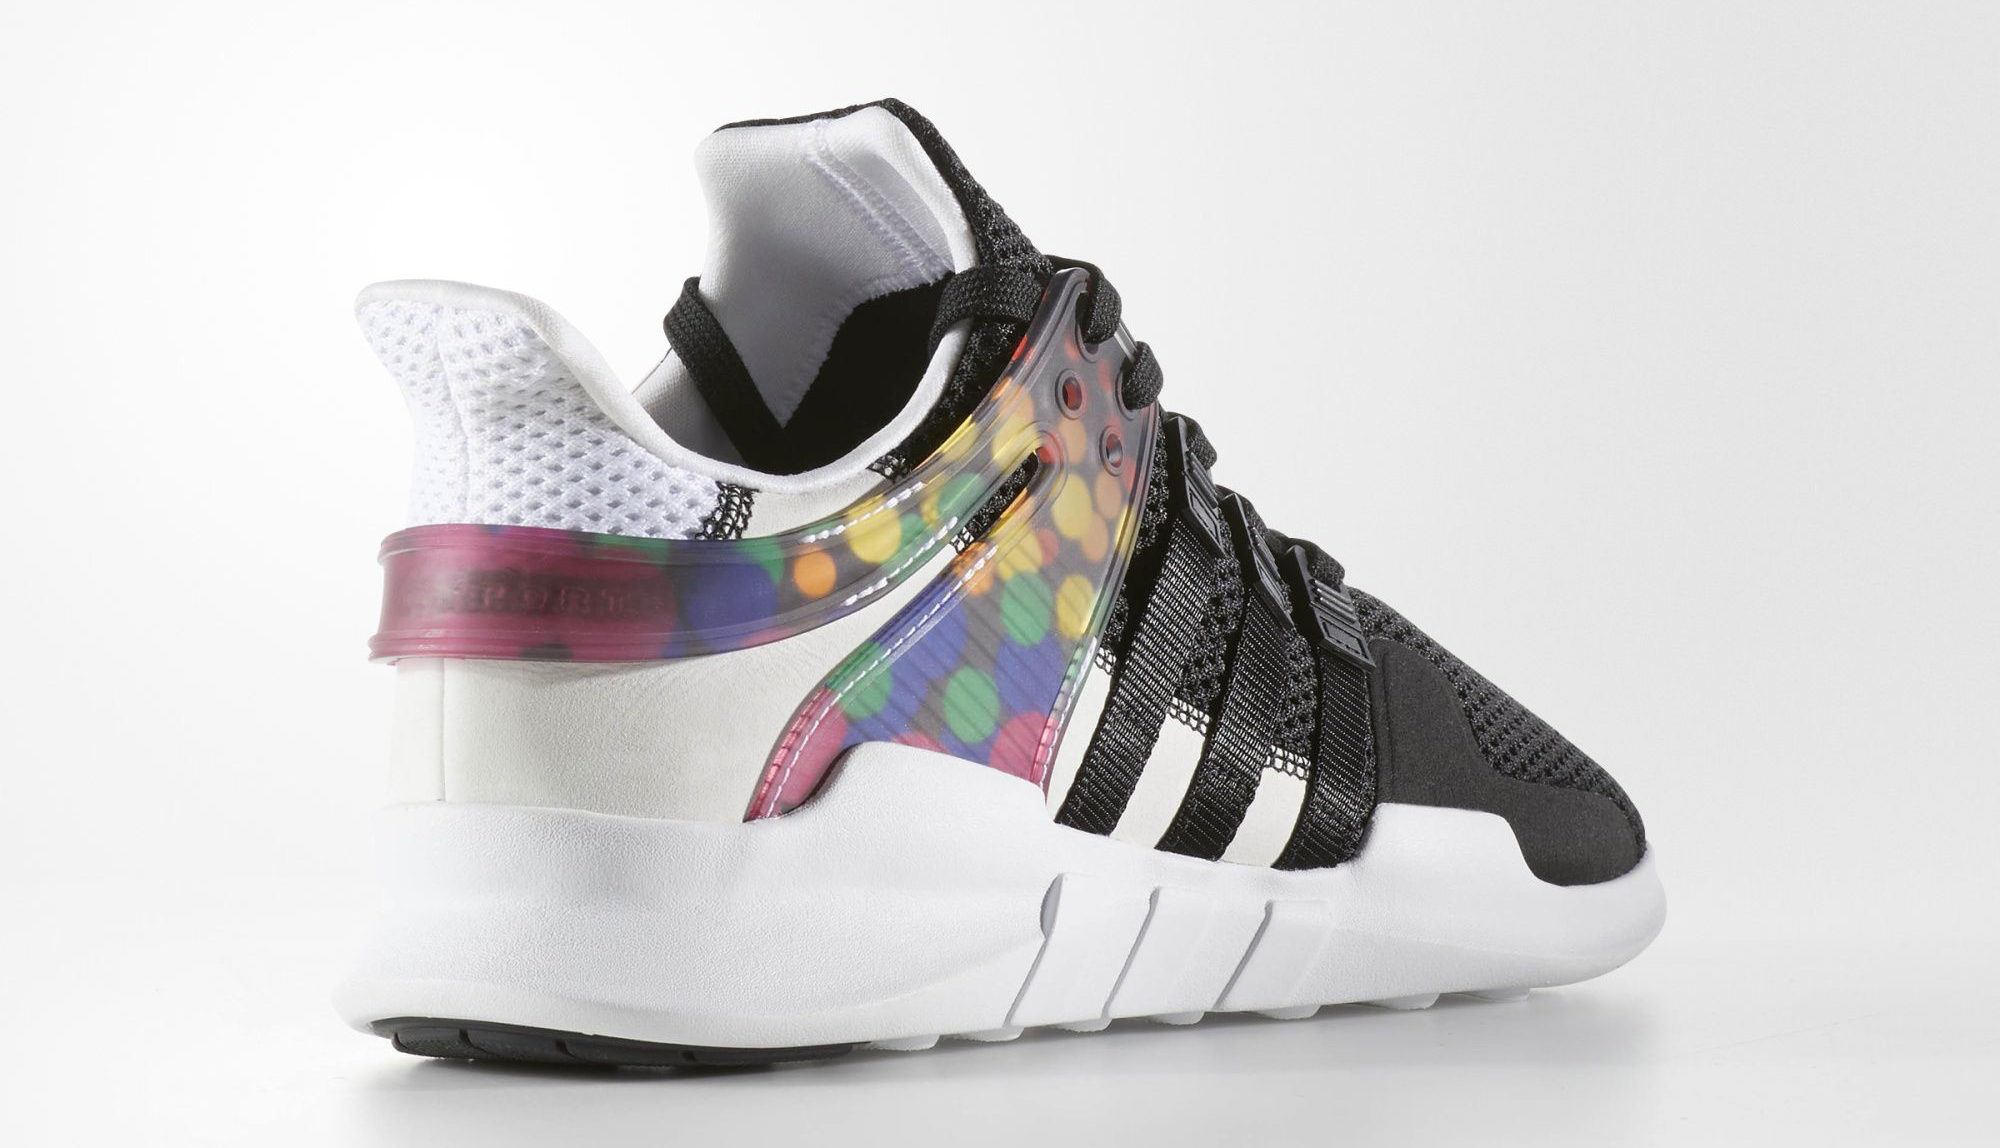 adidas-eqt-support-adv-pride-pack-1